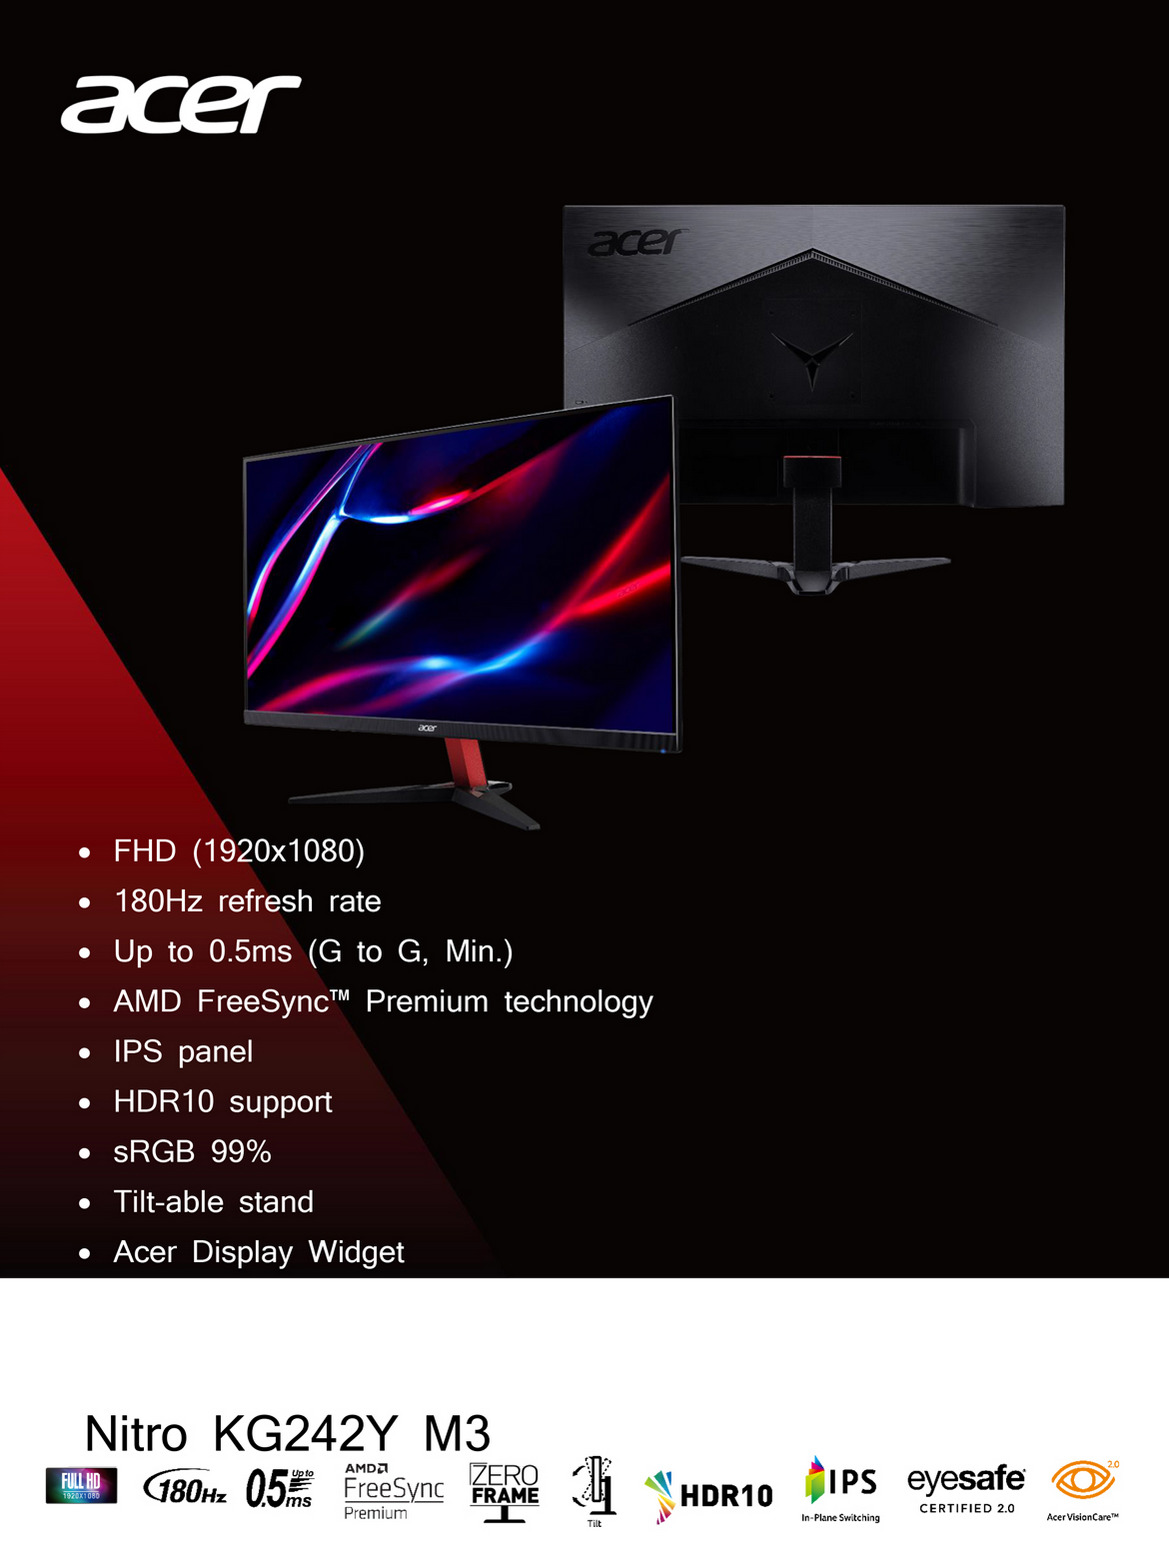 A large marketing image providing additional information about the product Acer Nitro KG242YM3 23.8" FHD 180Hz IPS Monitor - Additional alt info not provided